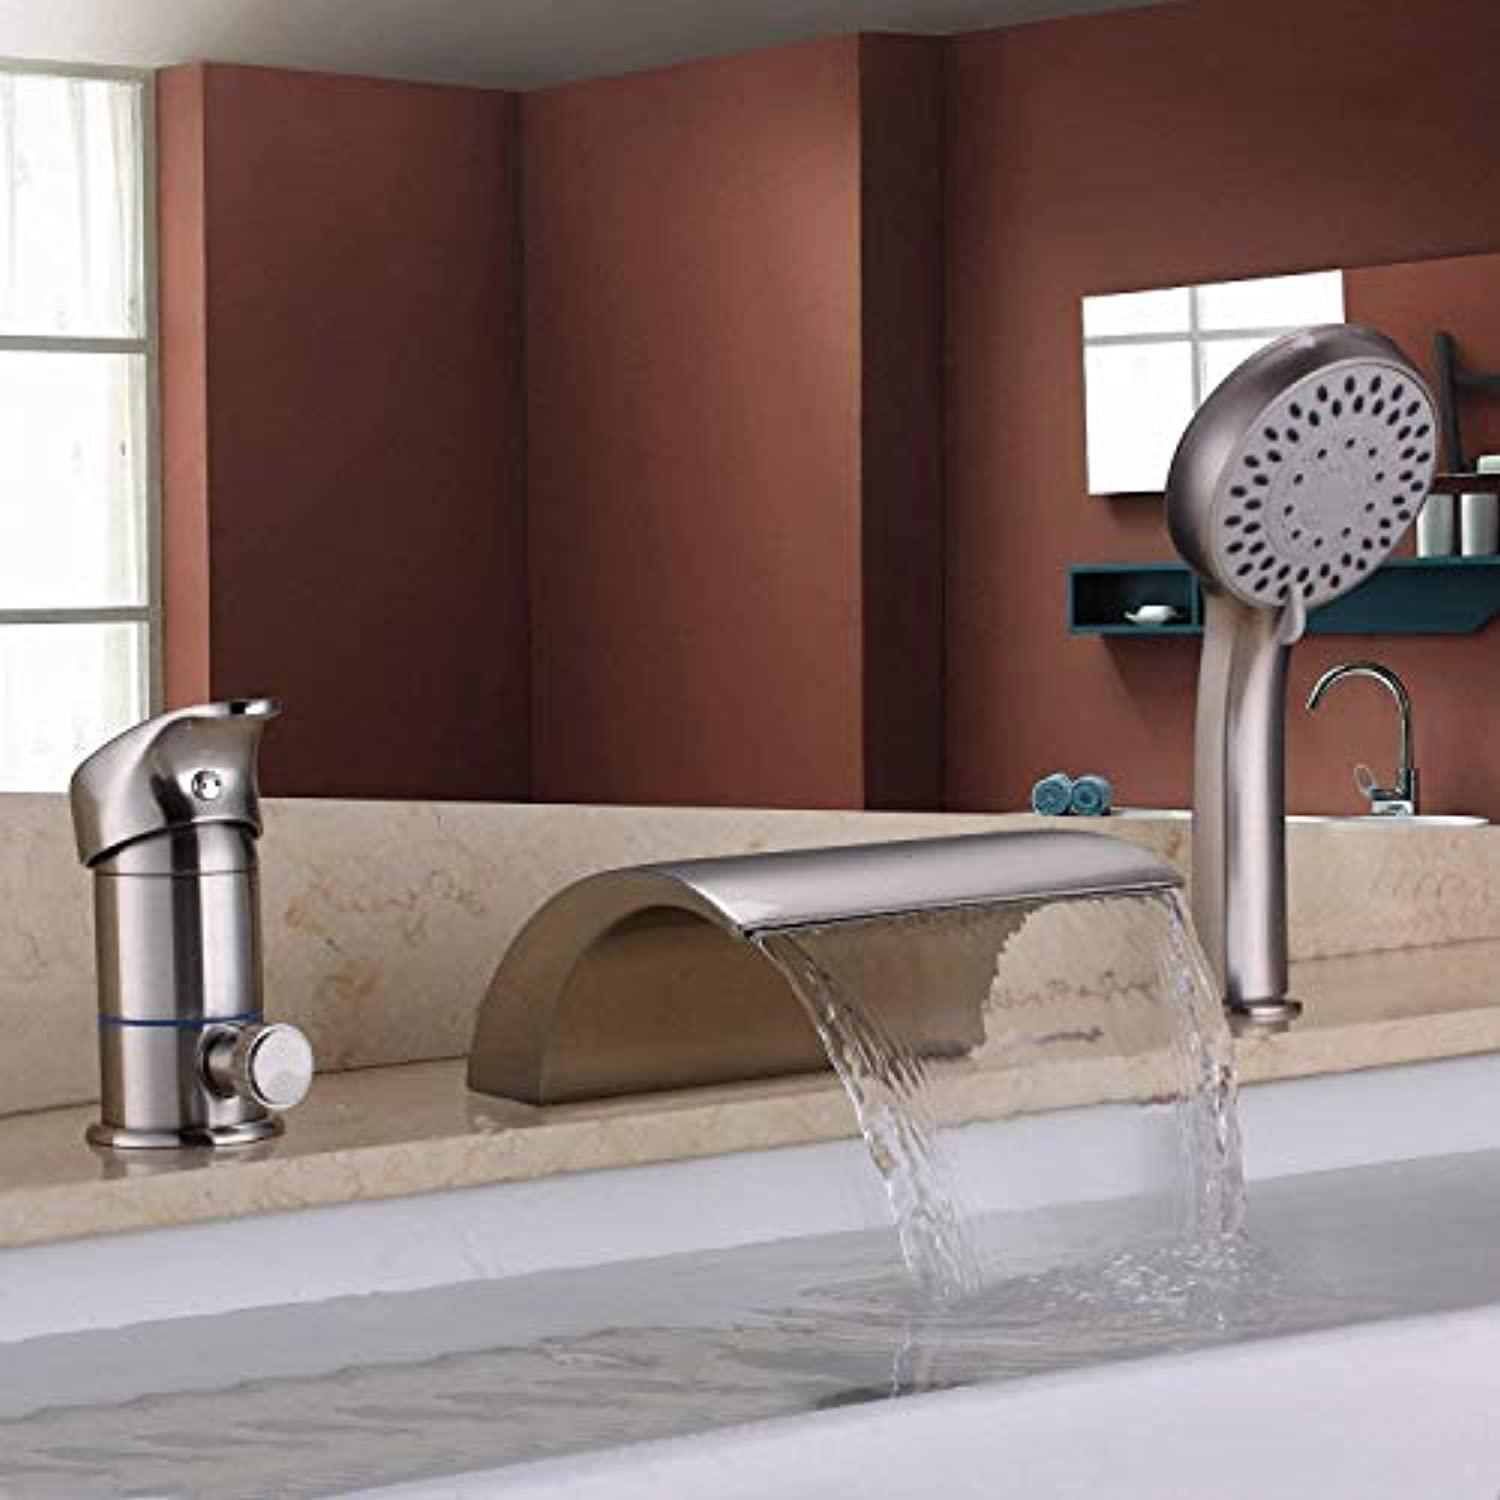 wuyuze roman tub faucet brushed nickel three holes single handle with waterfall tub filler with hand shower high flow